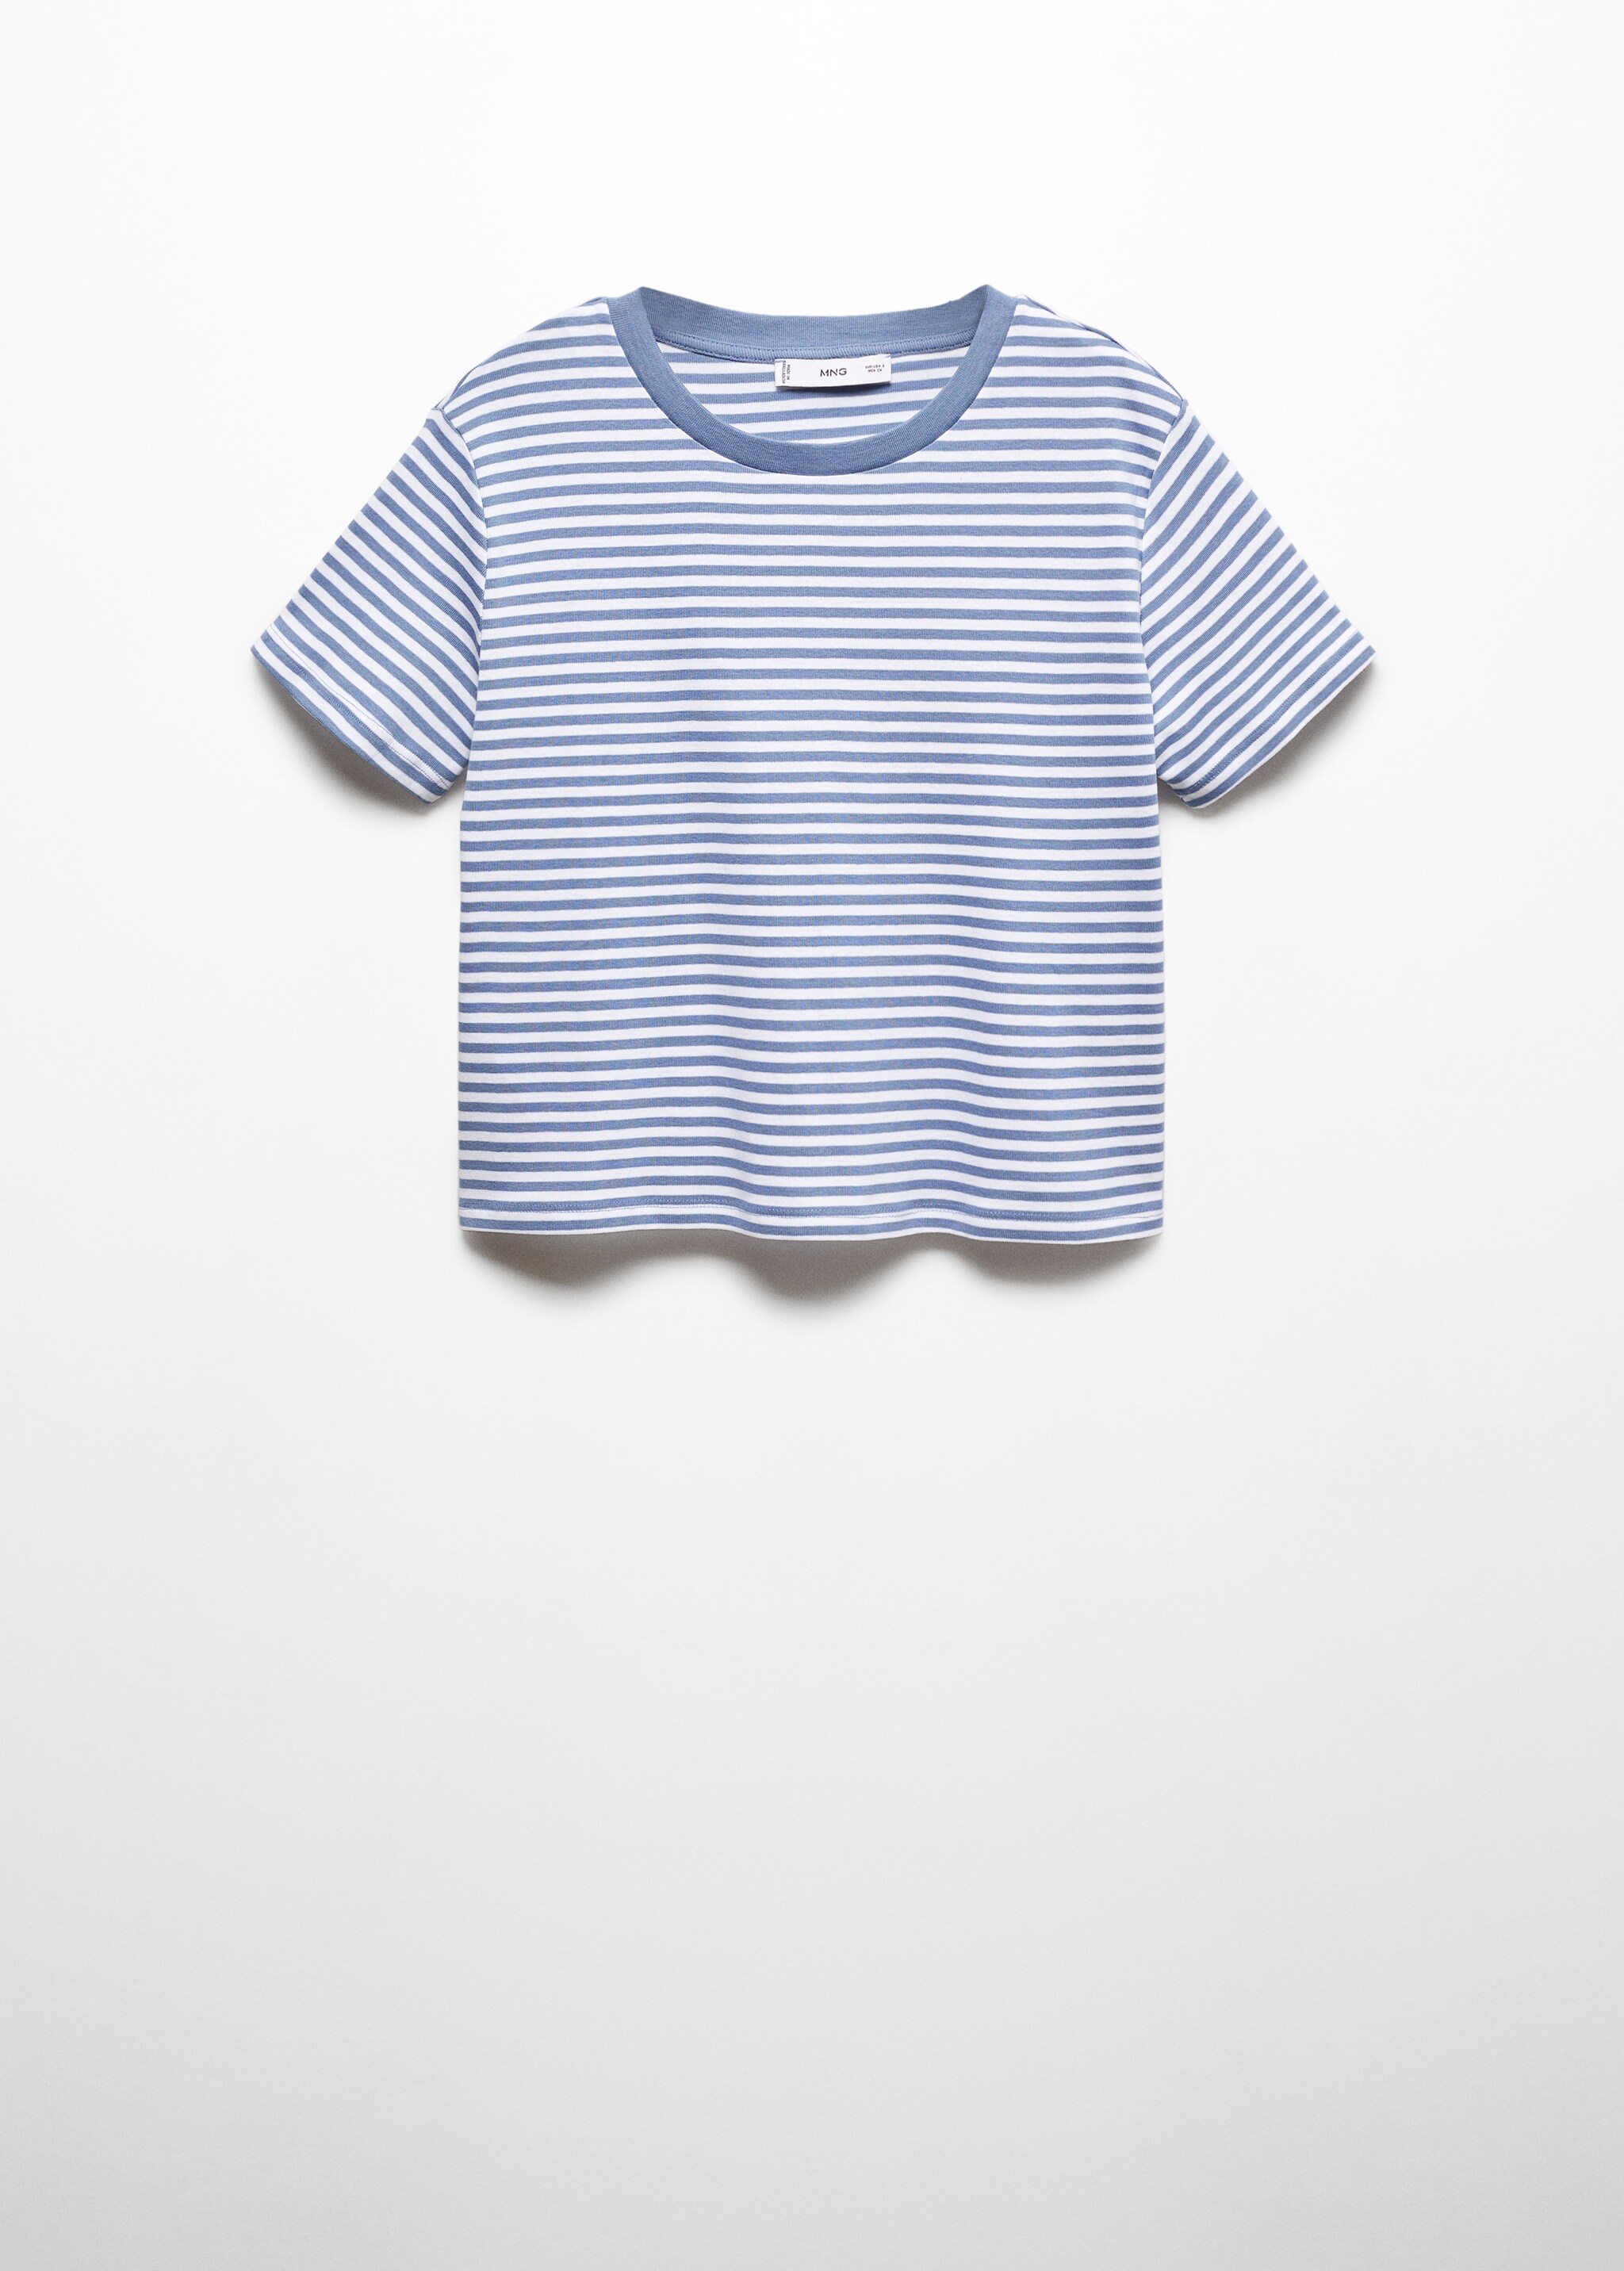 Striped short-sleeved t-shirt - Article without model